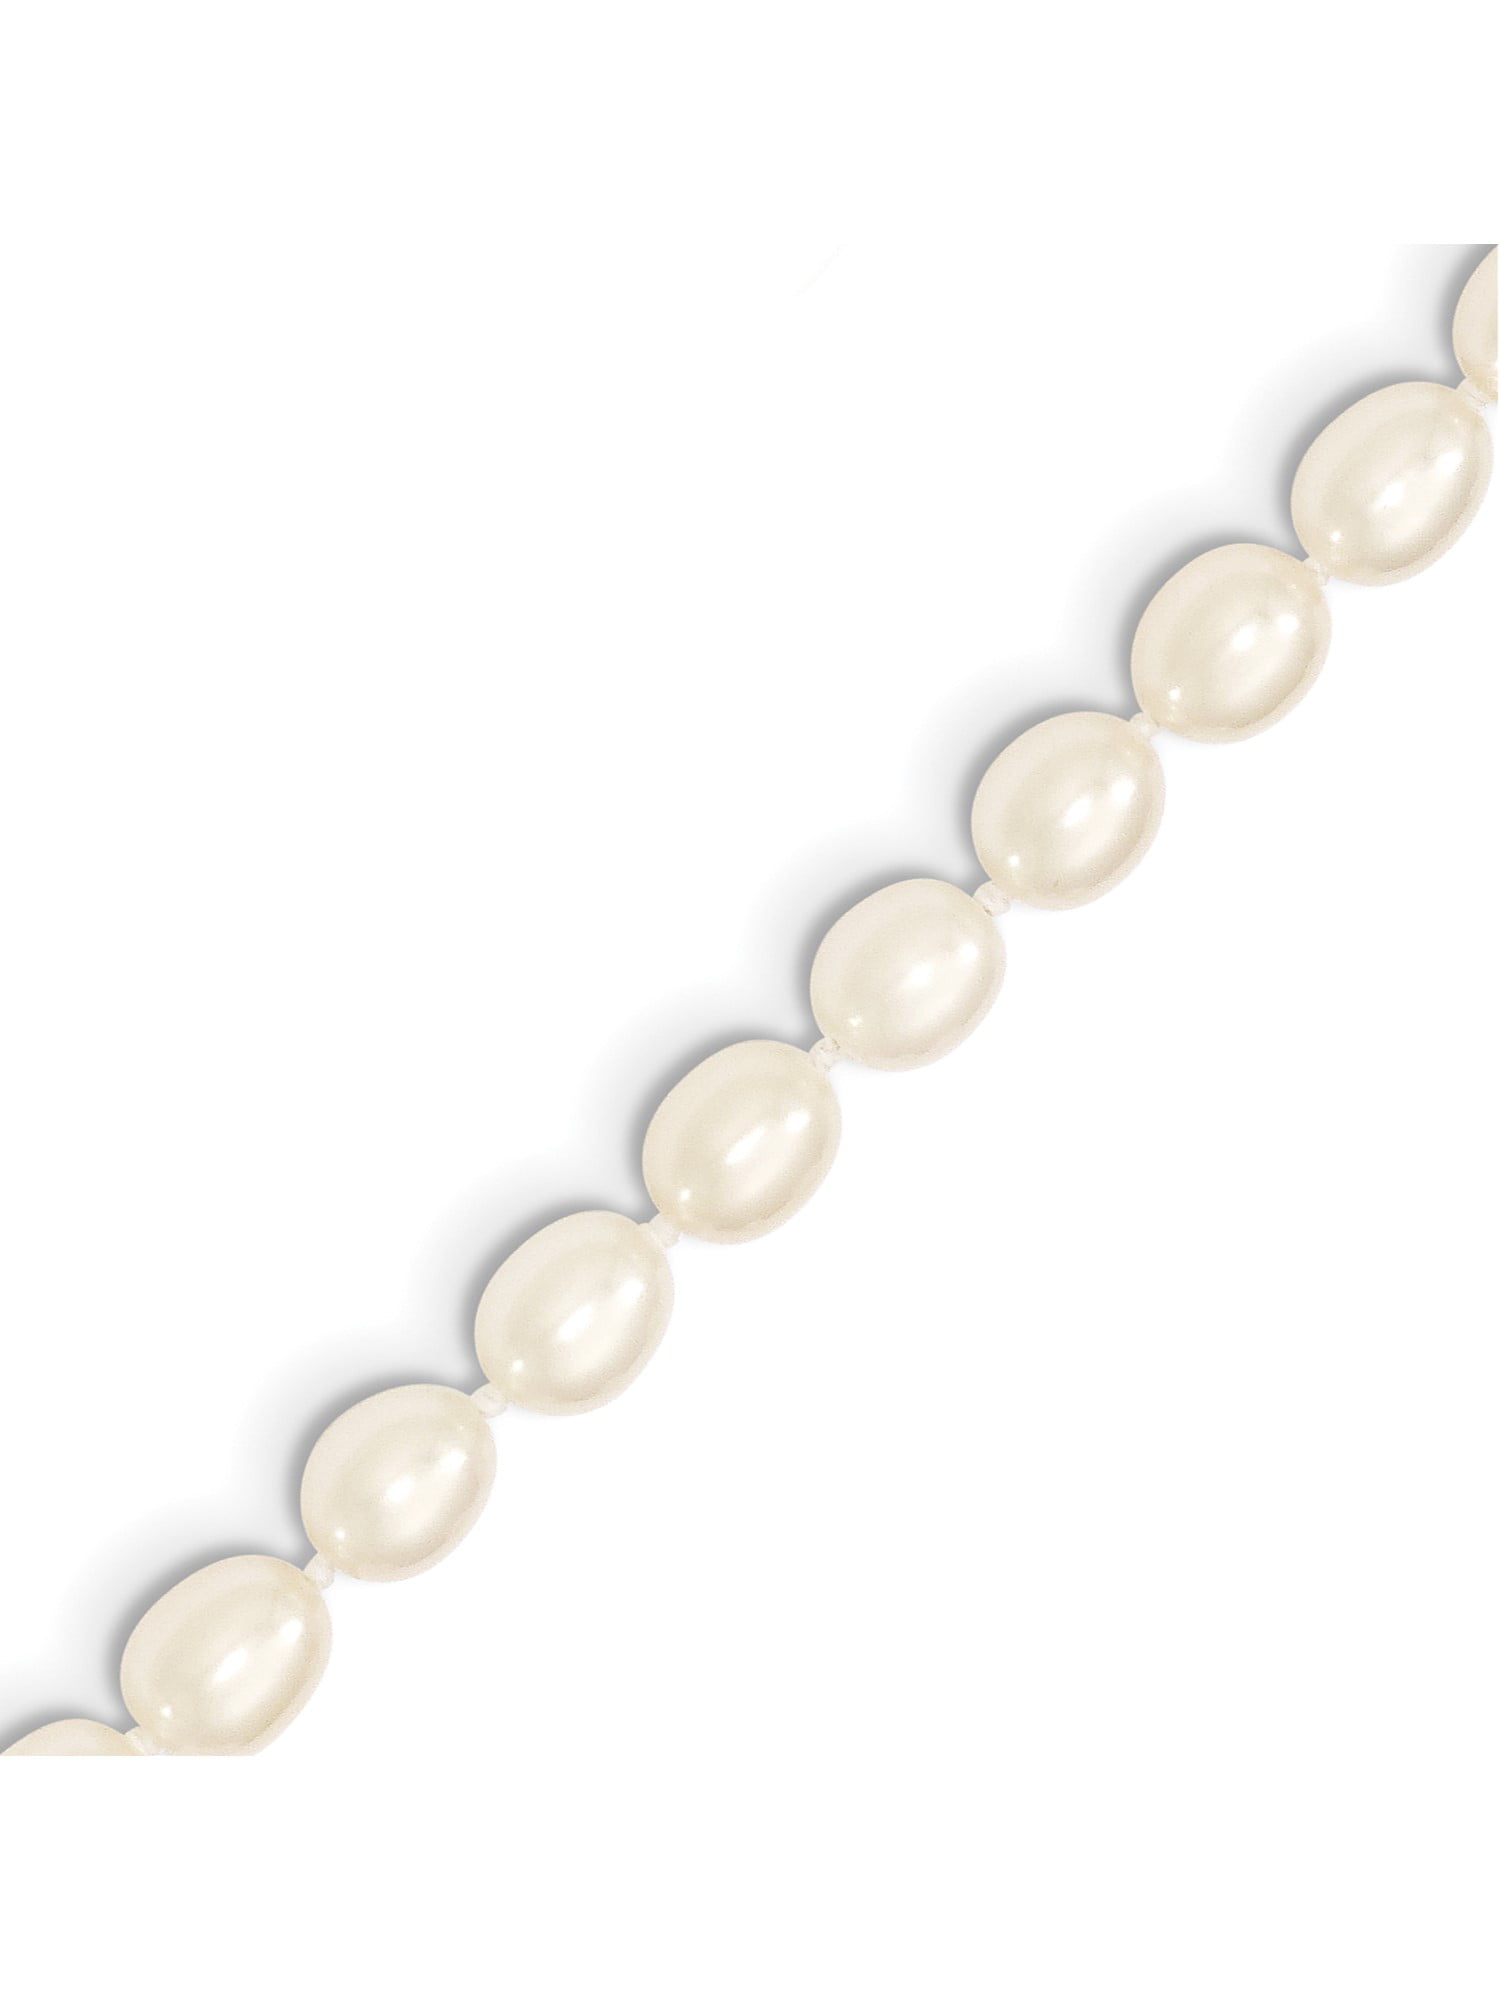 5-6mm Rice White Natural Freshwater 17" Pearl Necklace for Women Chokers Jewelry